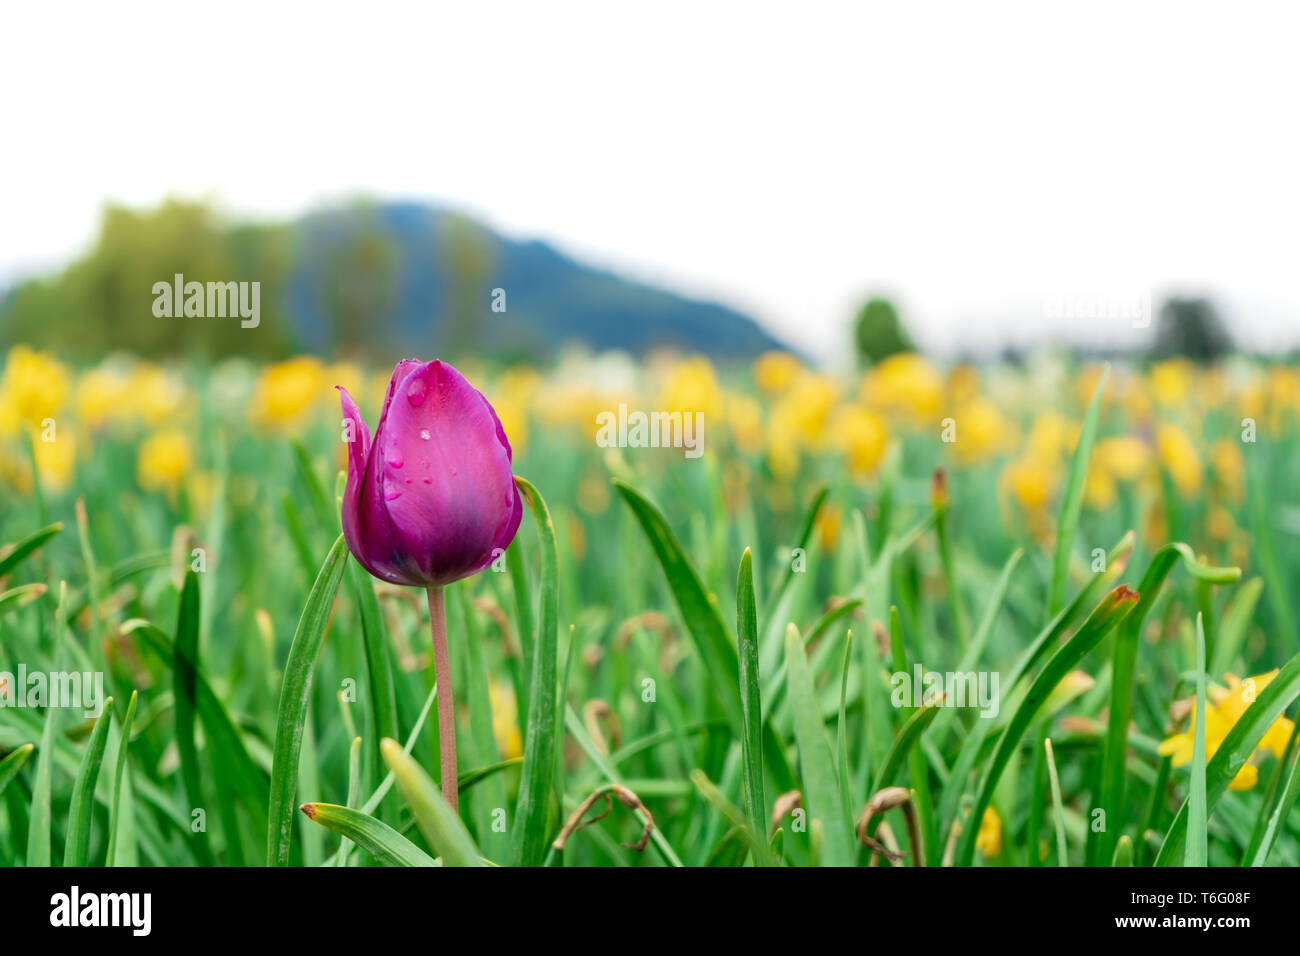 Deep purple pink tulip growing in a flower field on a farm. Bright green, tall stems and yellow tulips in the background. Selective focus on tulip. Stock Photo